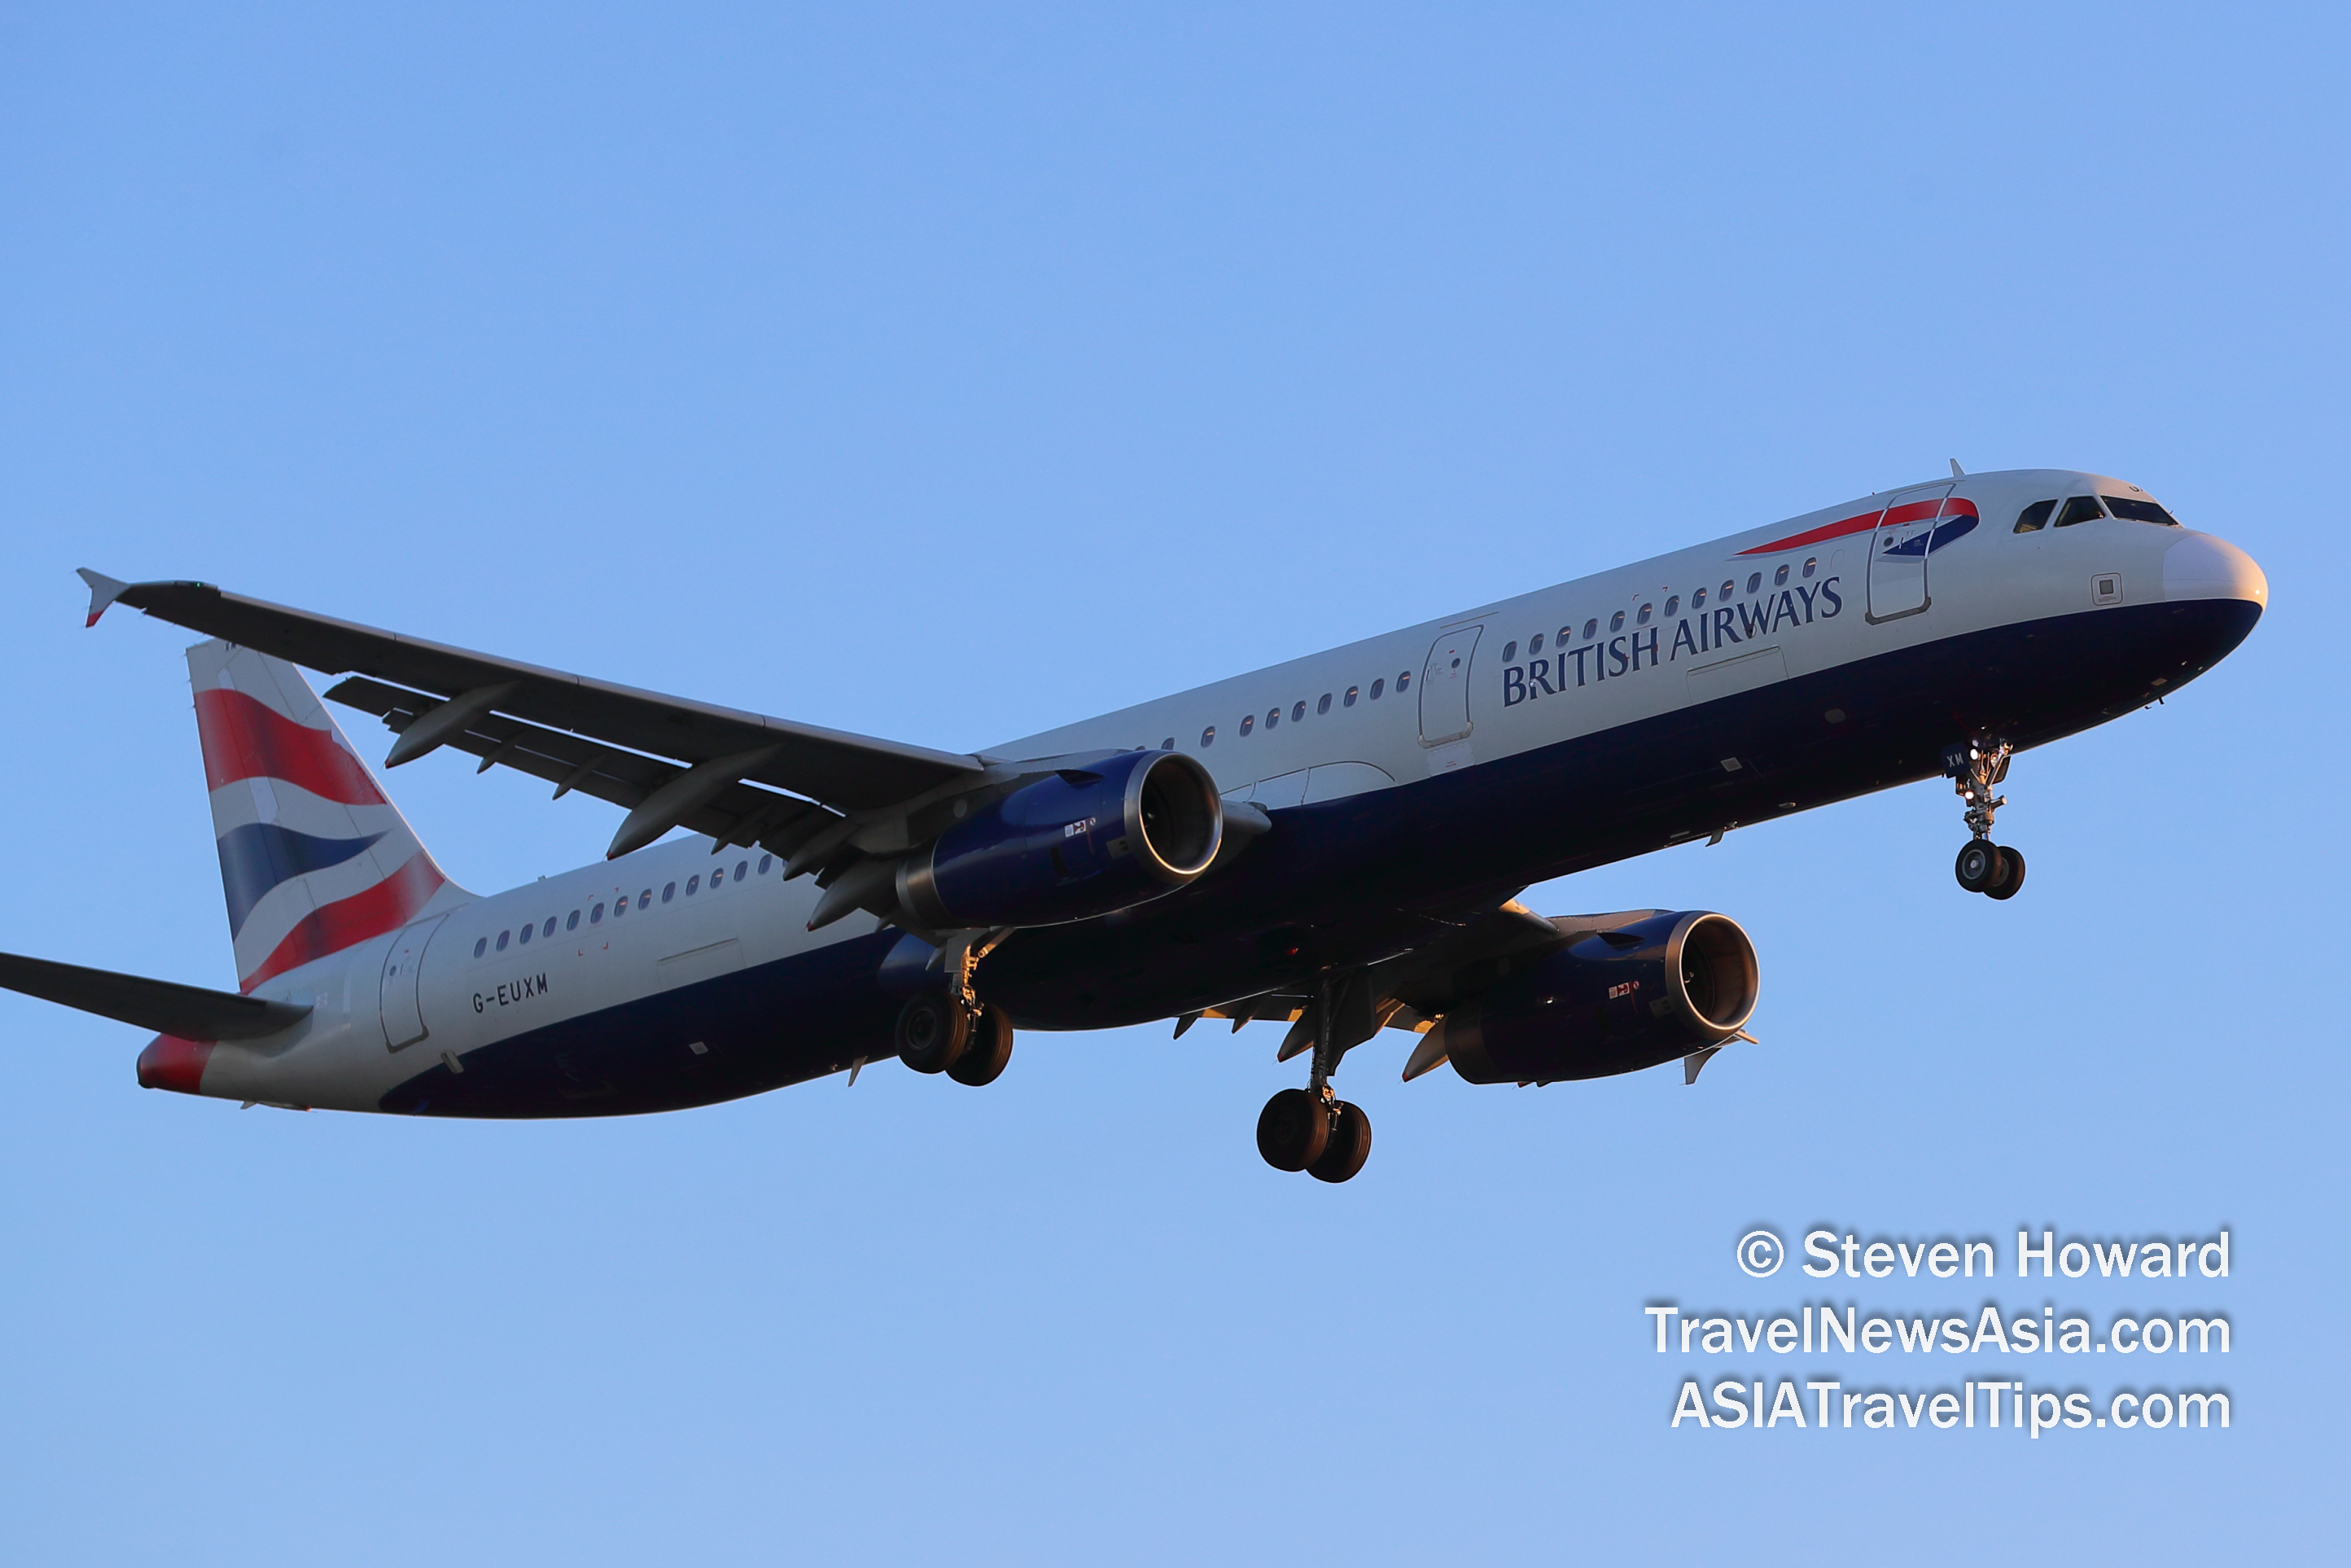 British Airways Airbus A321 reg: G-EUXM. Picture by Steven Howard of TravelNewsAsia.com Click to enlarge.